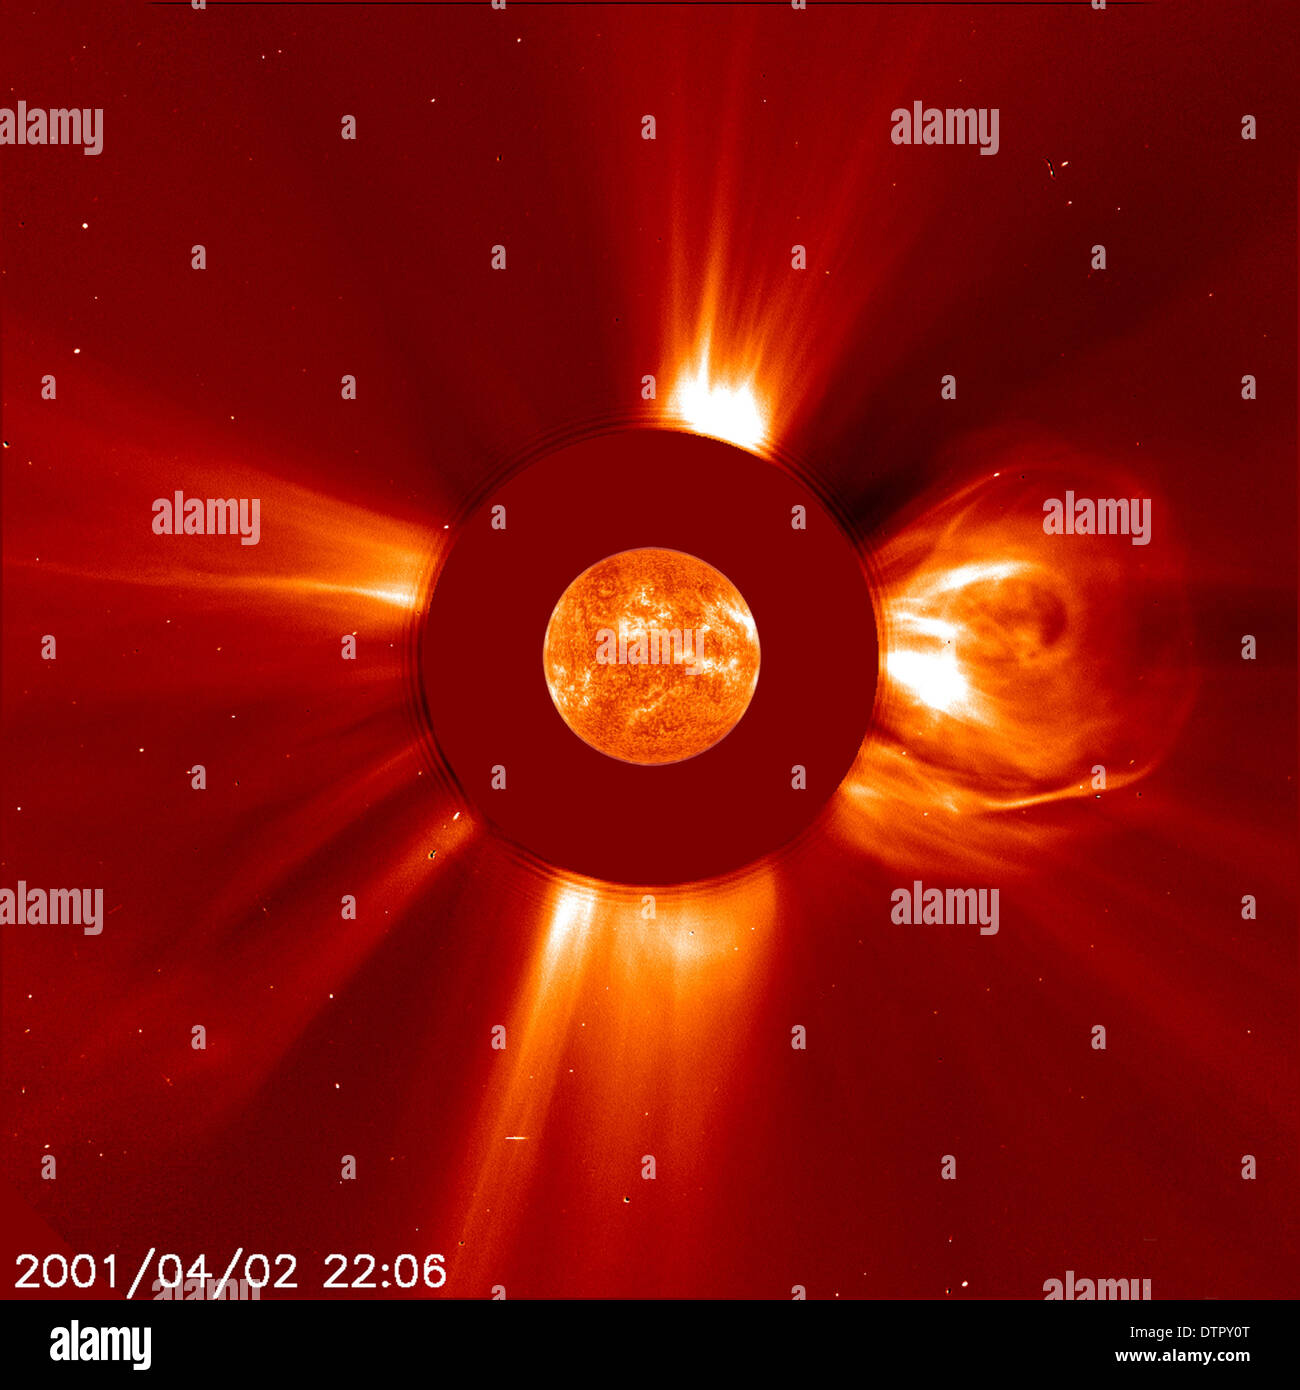 The Sun Unleashed The Biggest Solar Flare Ever Recorded As Observed By The Solar And